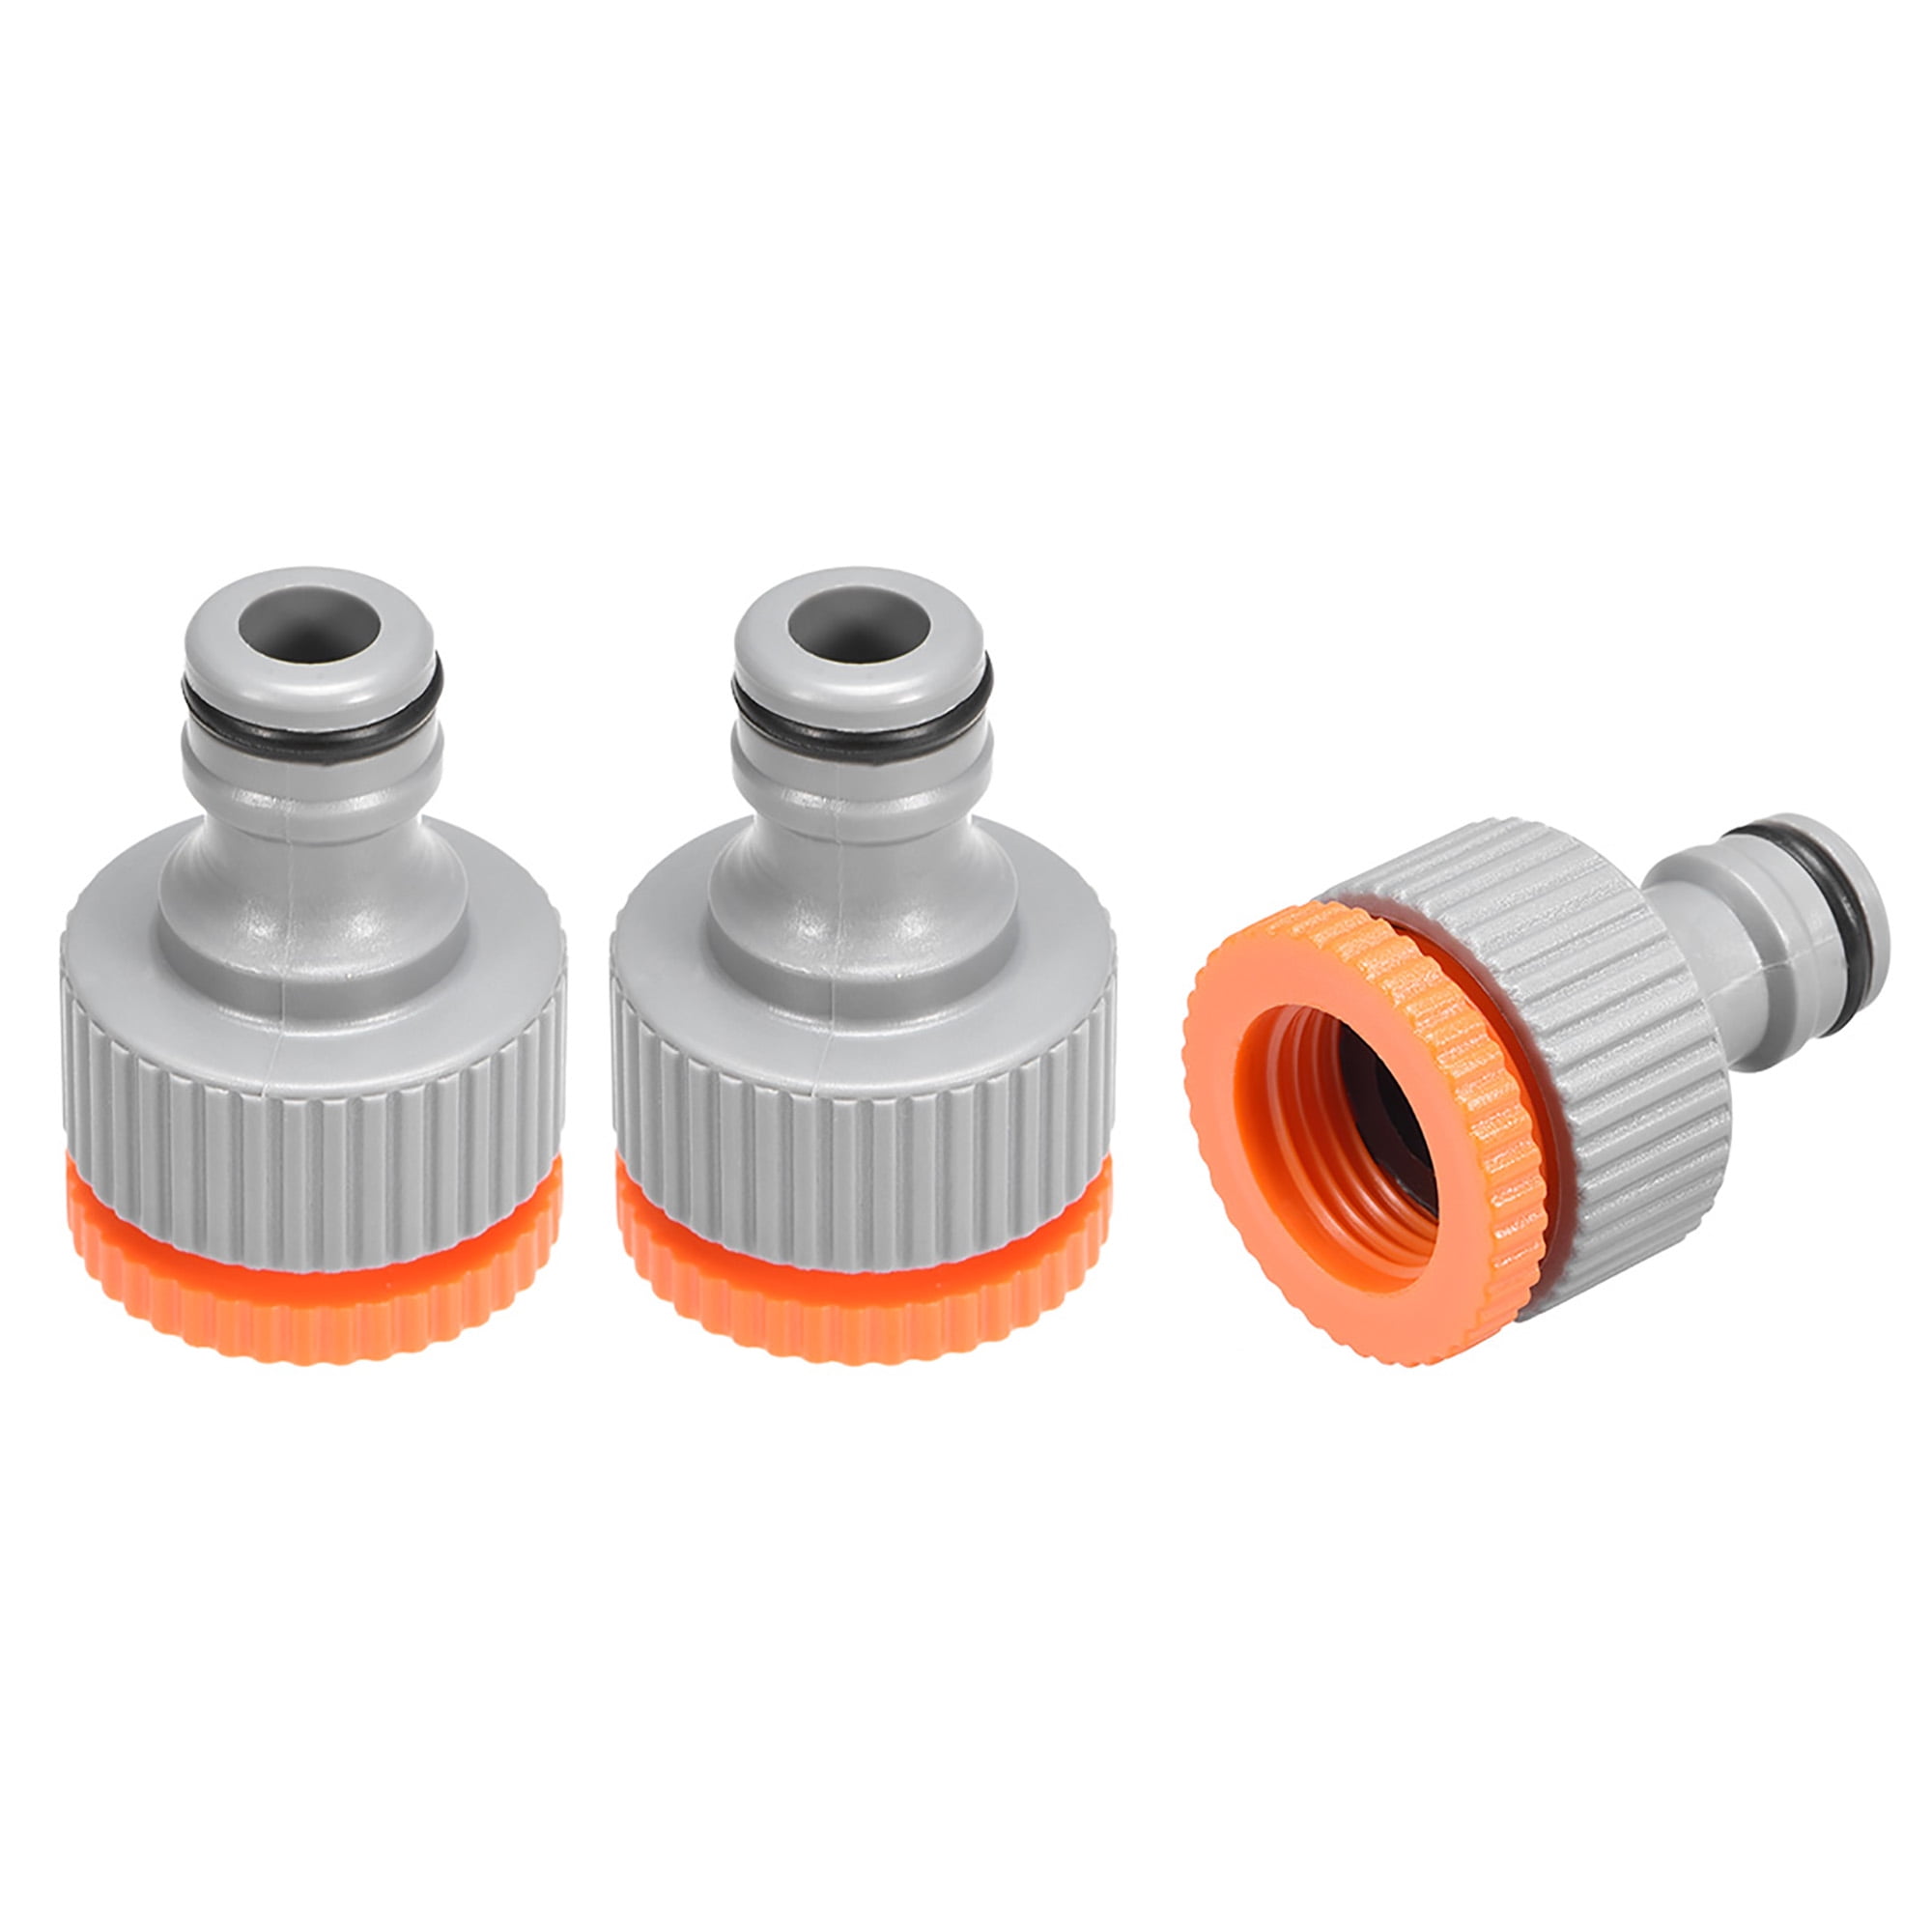 Pipe Fitting Tap Adaptor Connector Garden G1/2 G3/4 in 1/4'' 3/8'' Water Hose